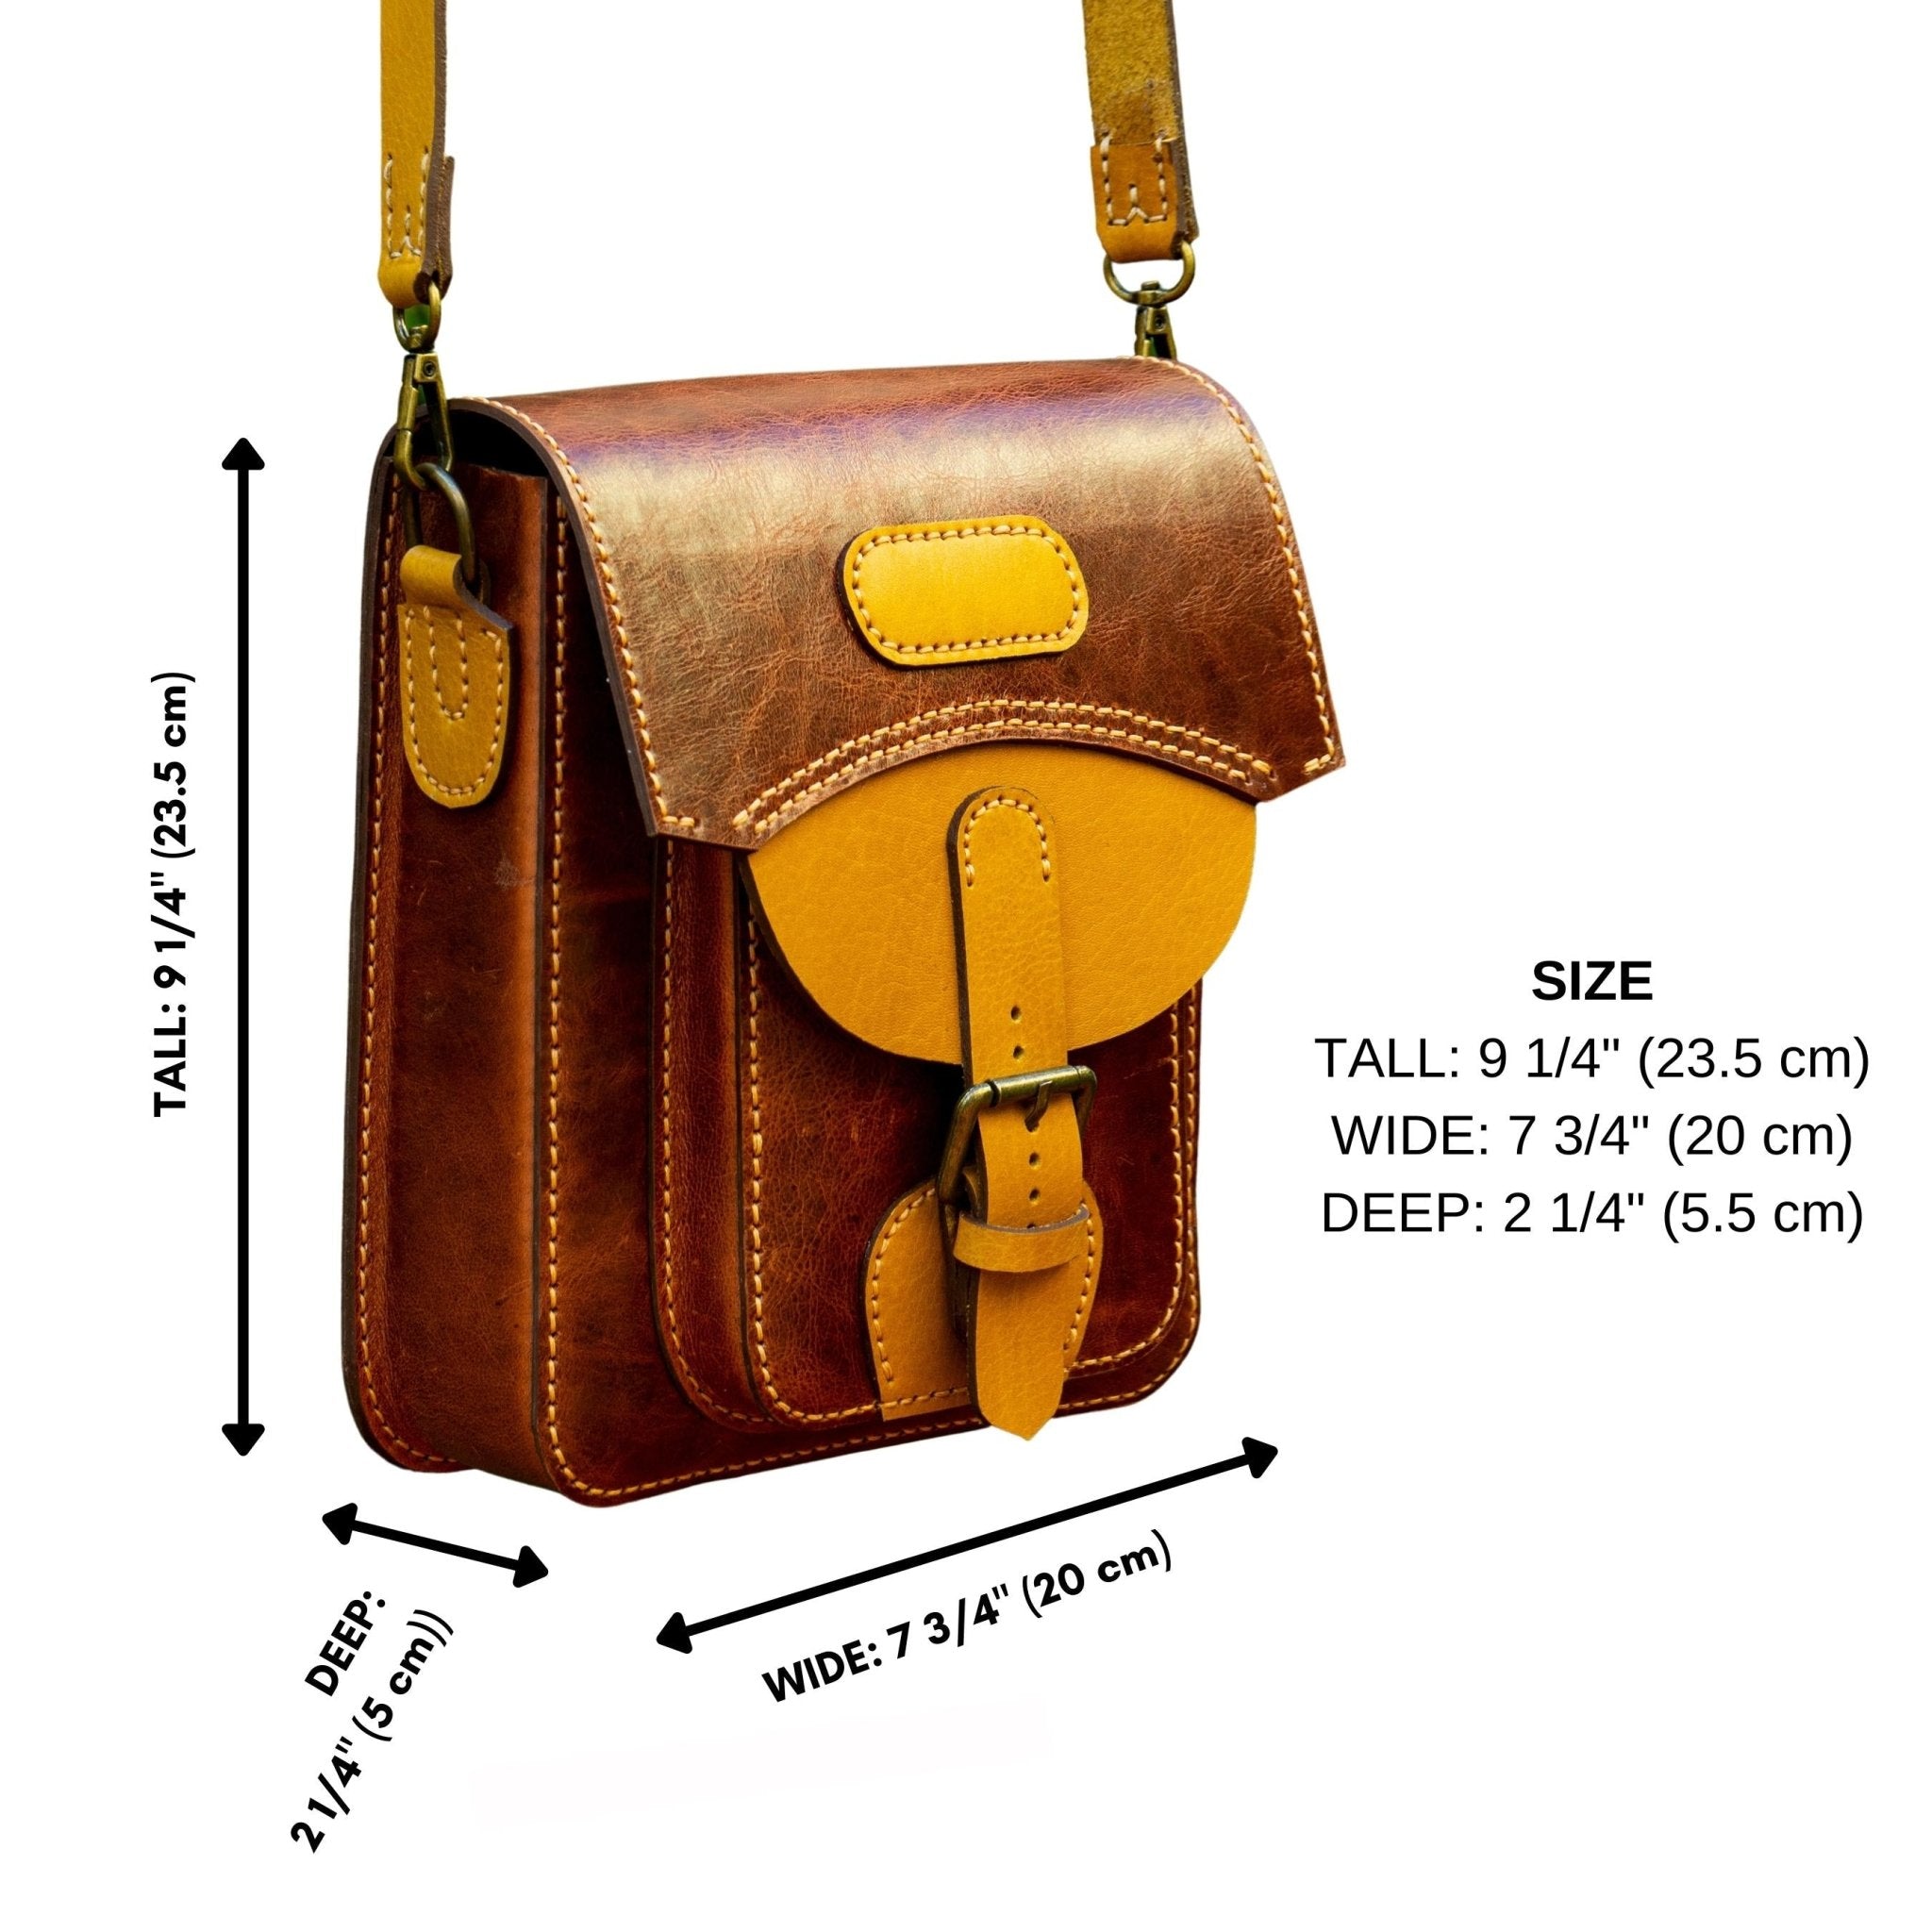 Morrison Crossbody, PDF Pattern And Instructional Video by Vasile and Pavel - Vasile and Pavel Leather Patterns